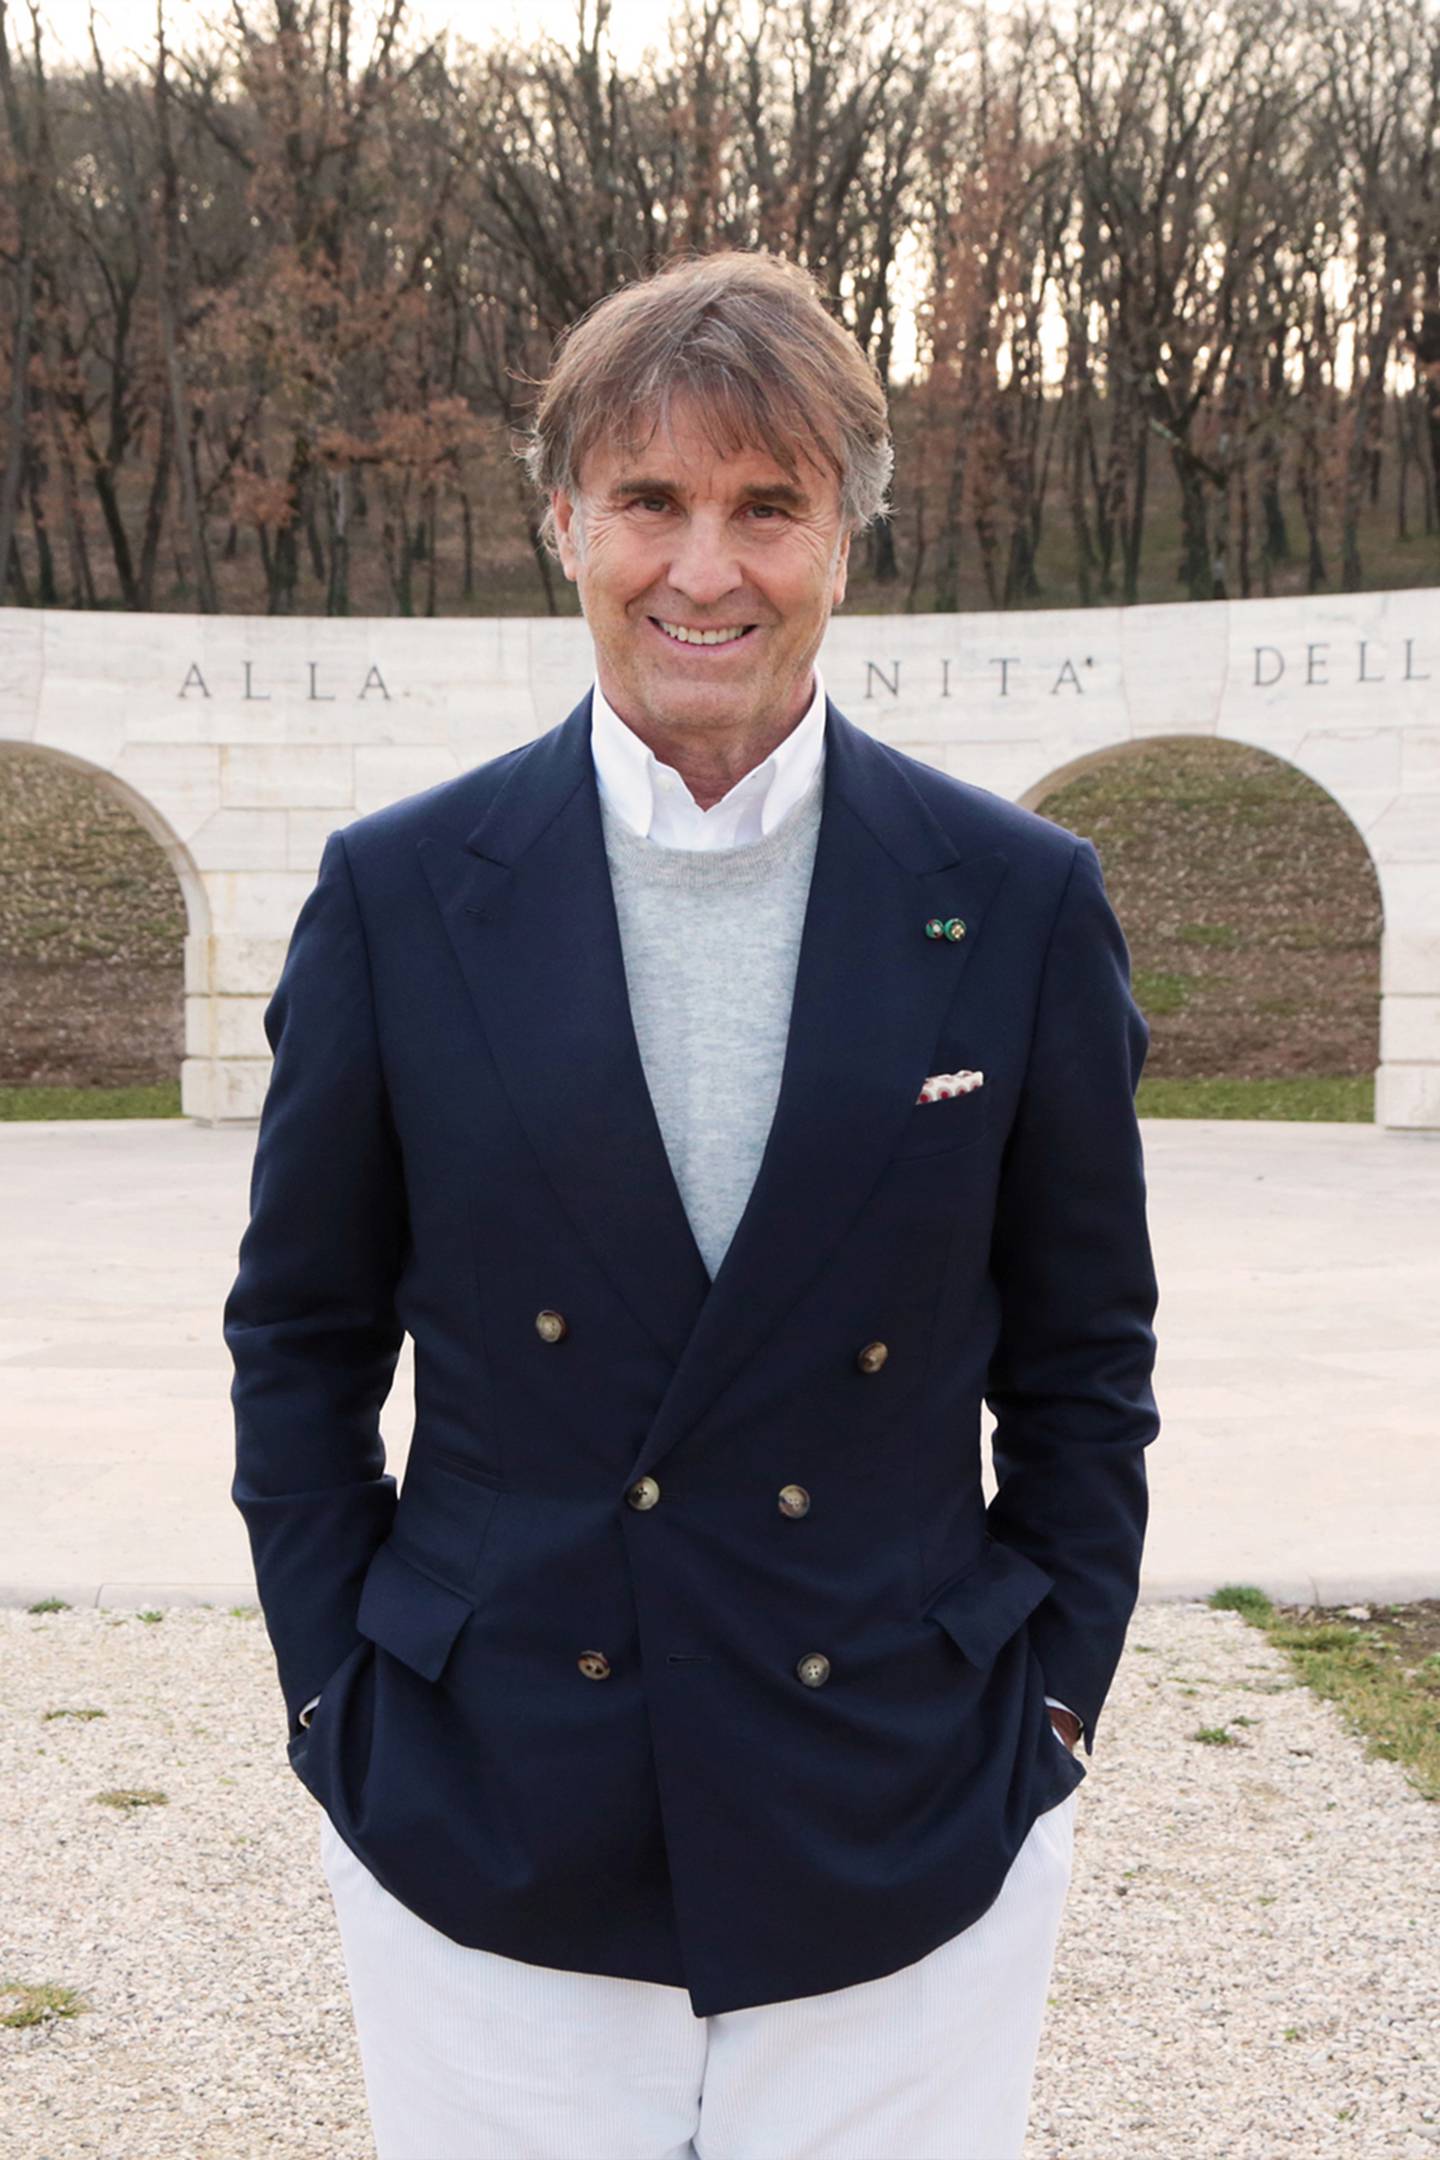 Brunello Cucinelli is the founder, chief executive and designer of his namesake luxury lifestyle brand.